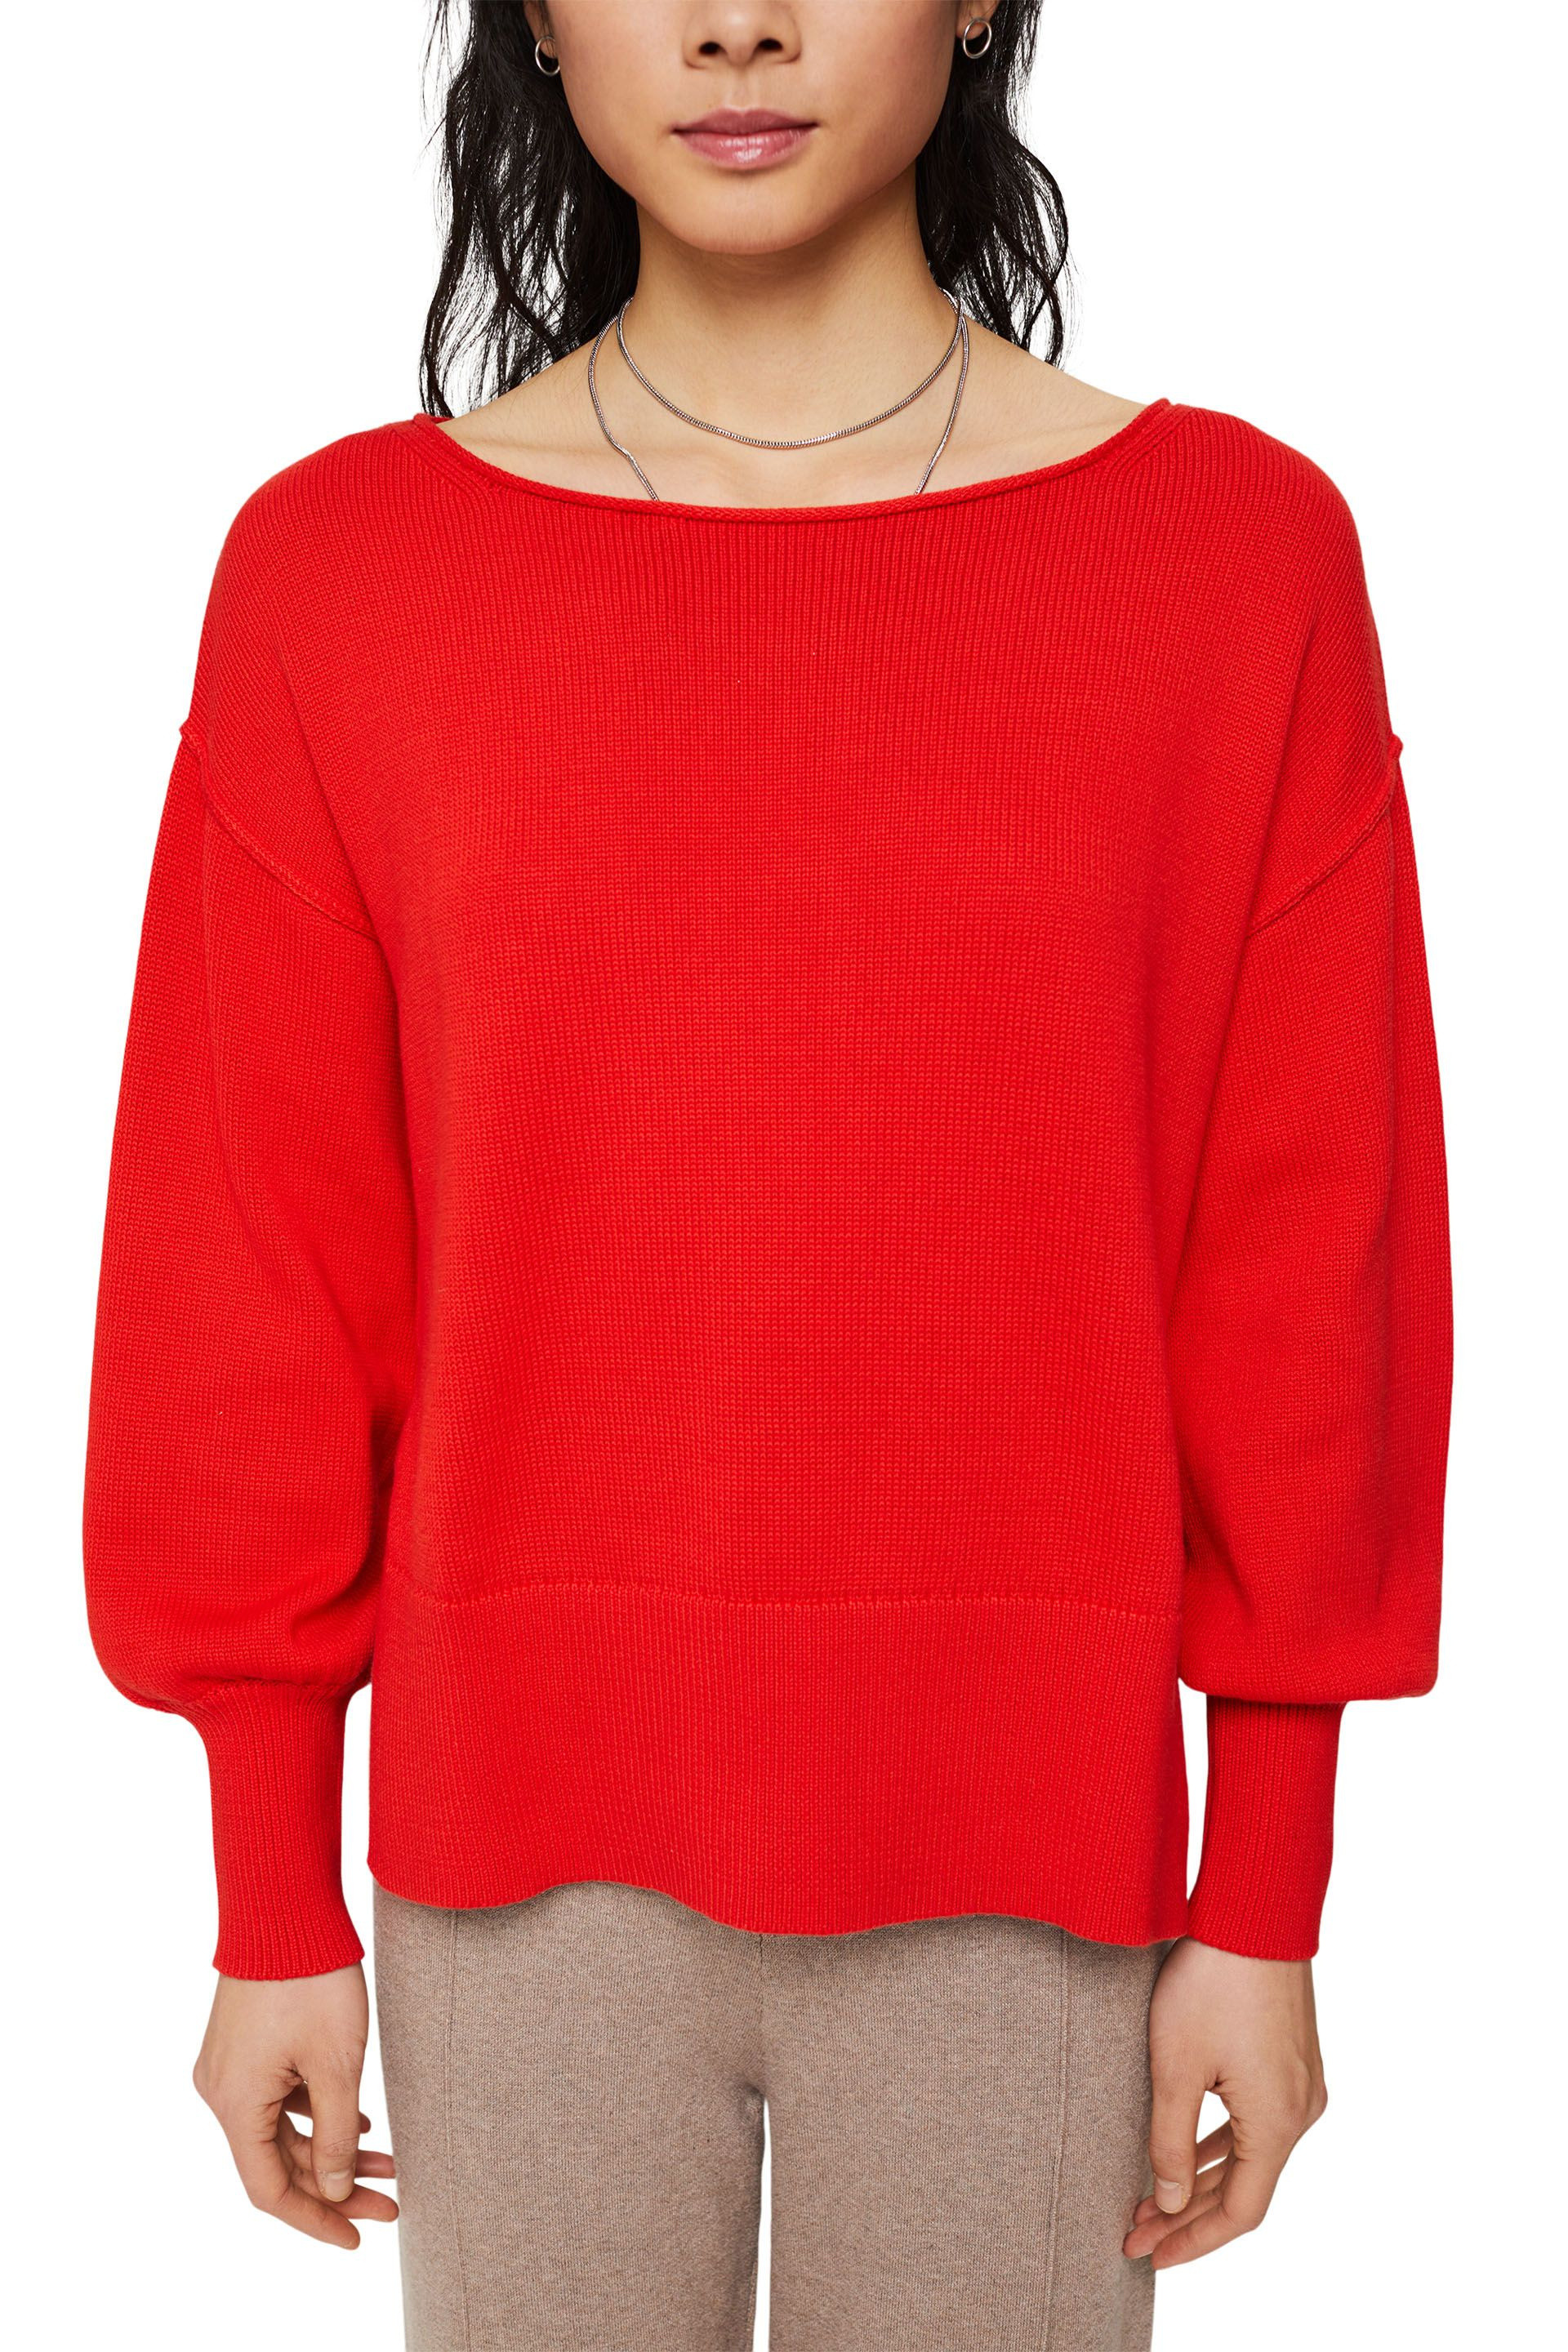 Pullover a maglia con spacchi, Rosso, large image number 1